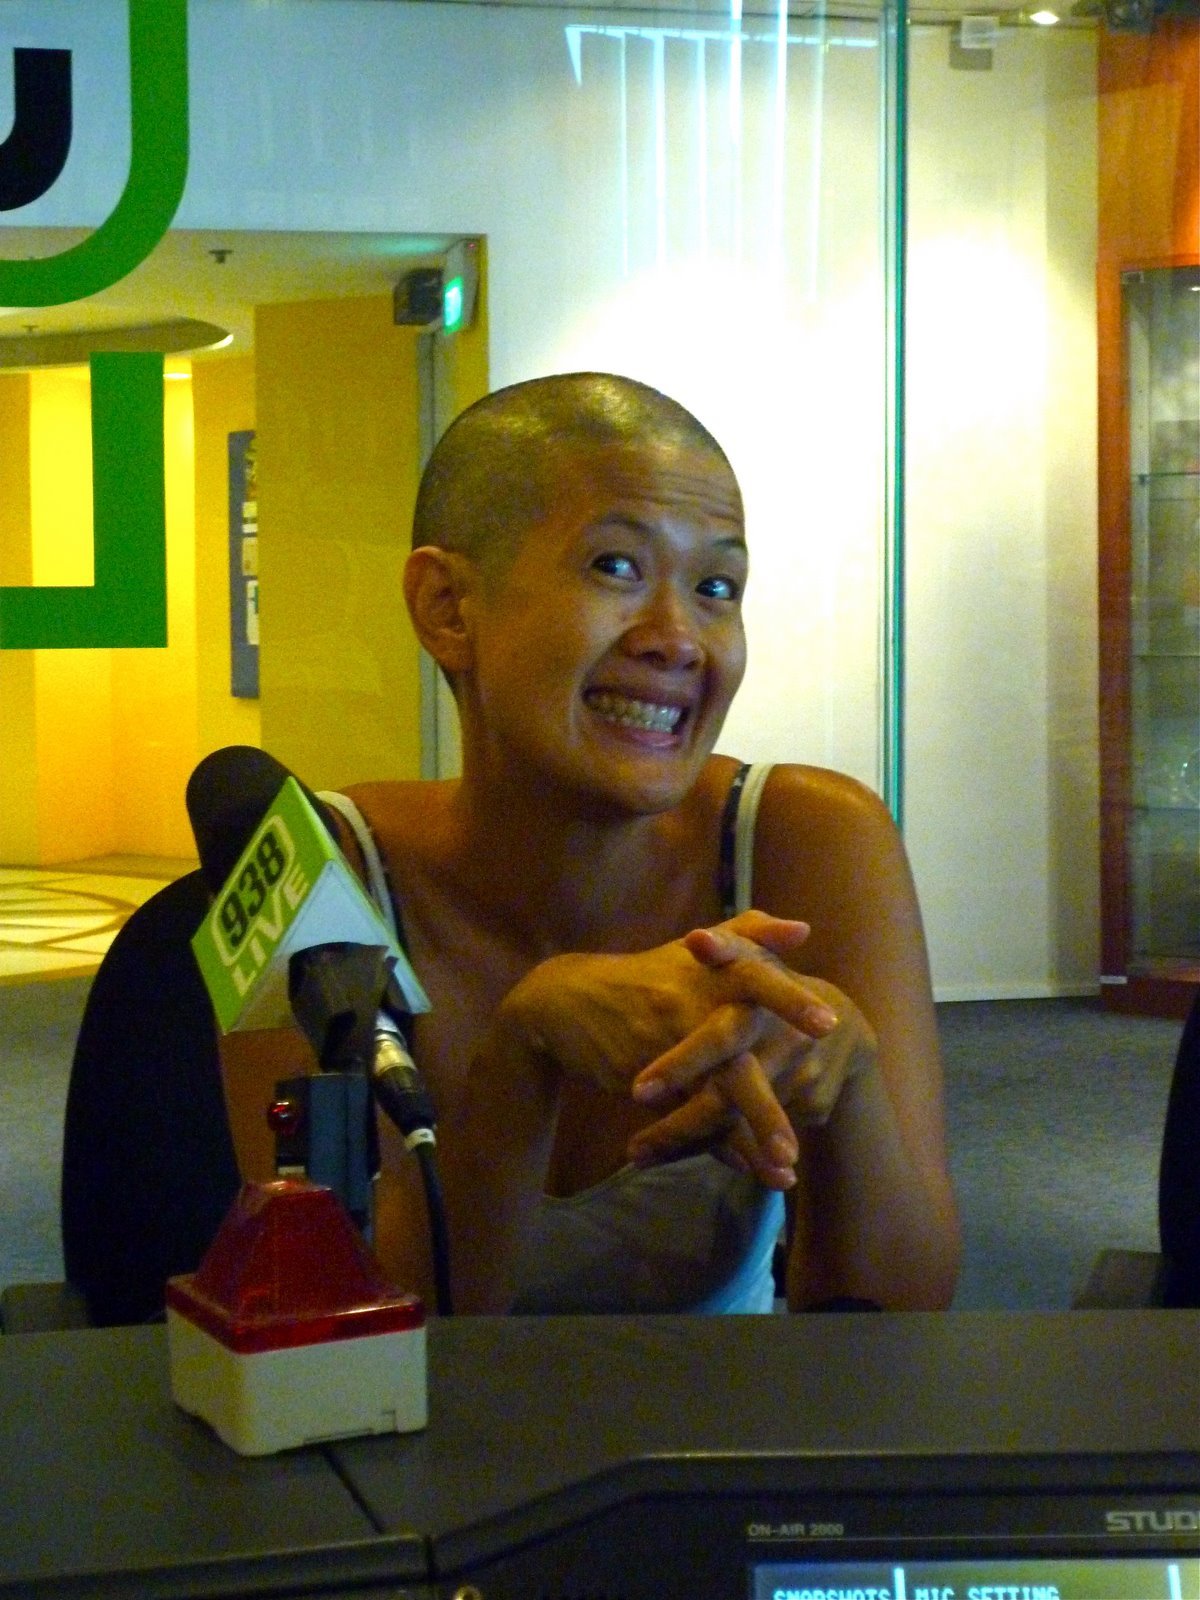  I learned about giving from my Mum, and to give without obligation. I learned from her to give a little something to people who come and do work in the house, or who help me with a task without being asked to. in 2008, I shaved my head for Hair for 